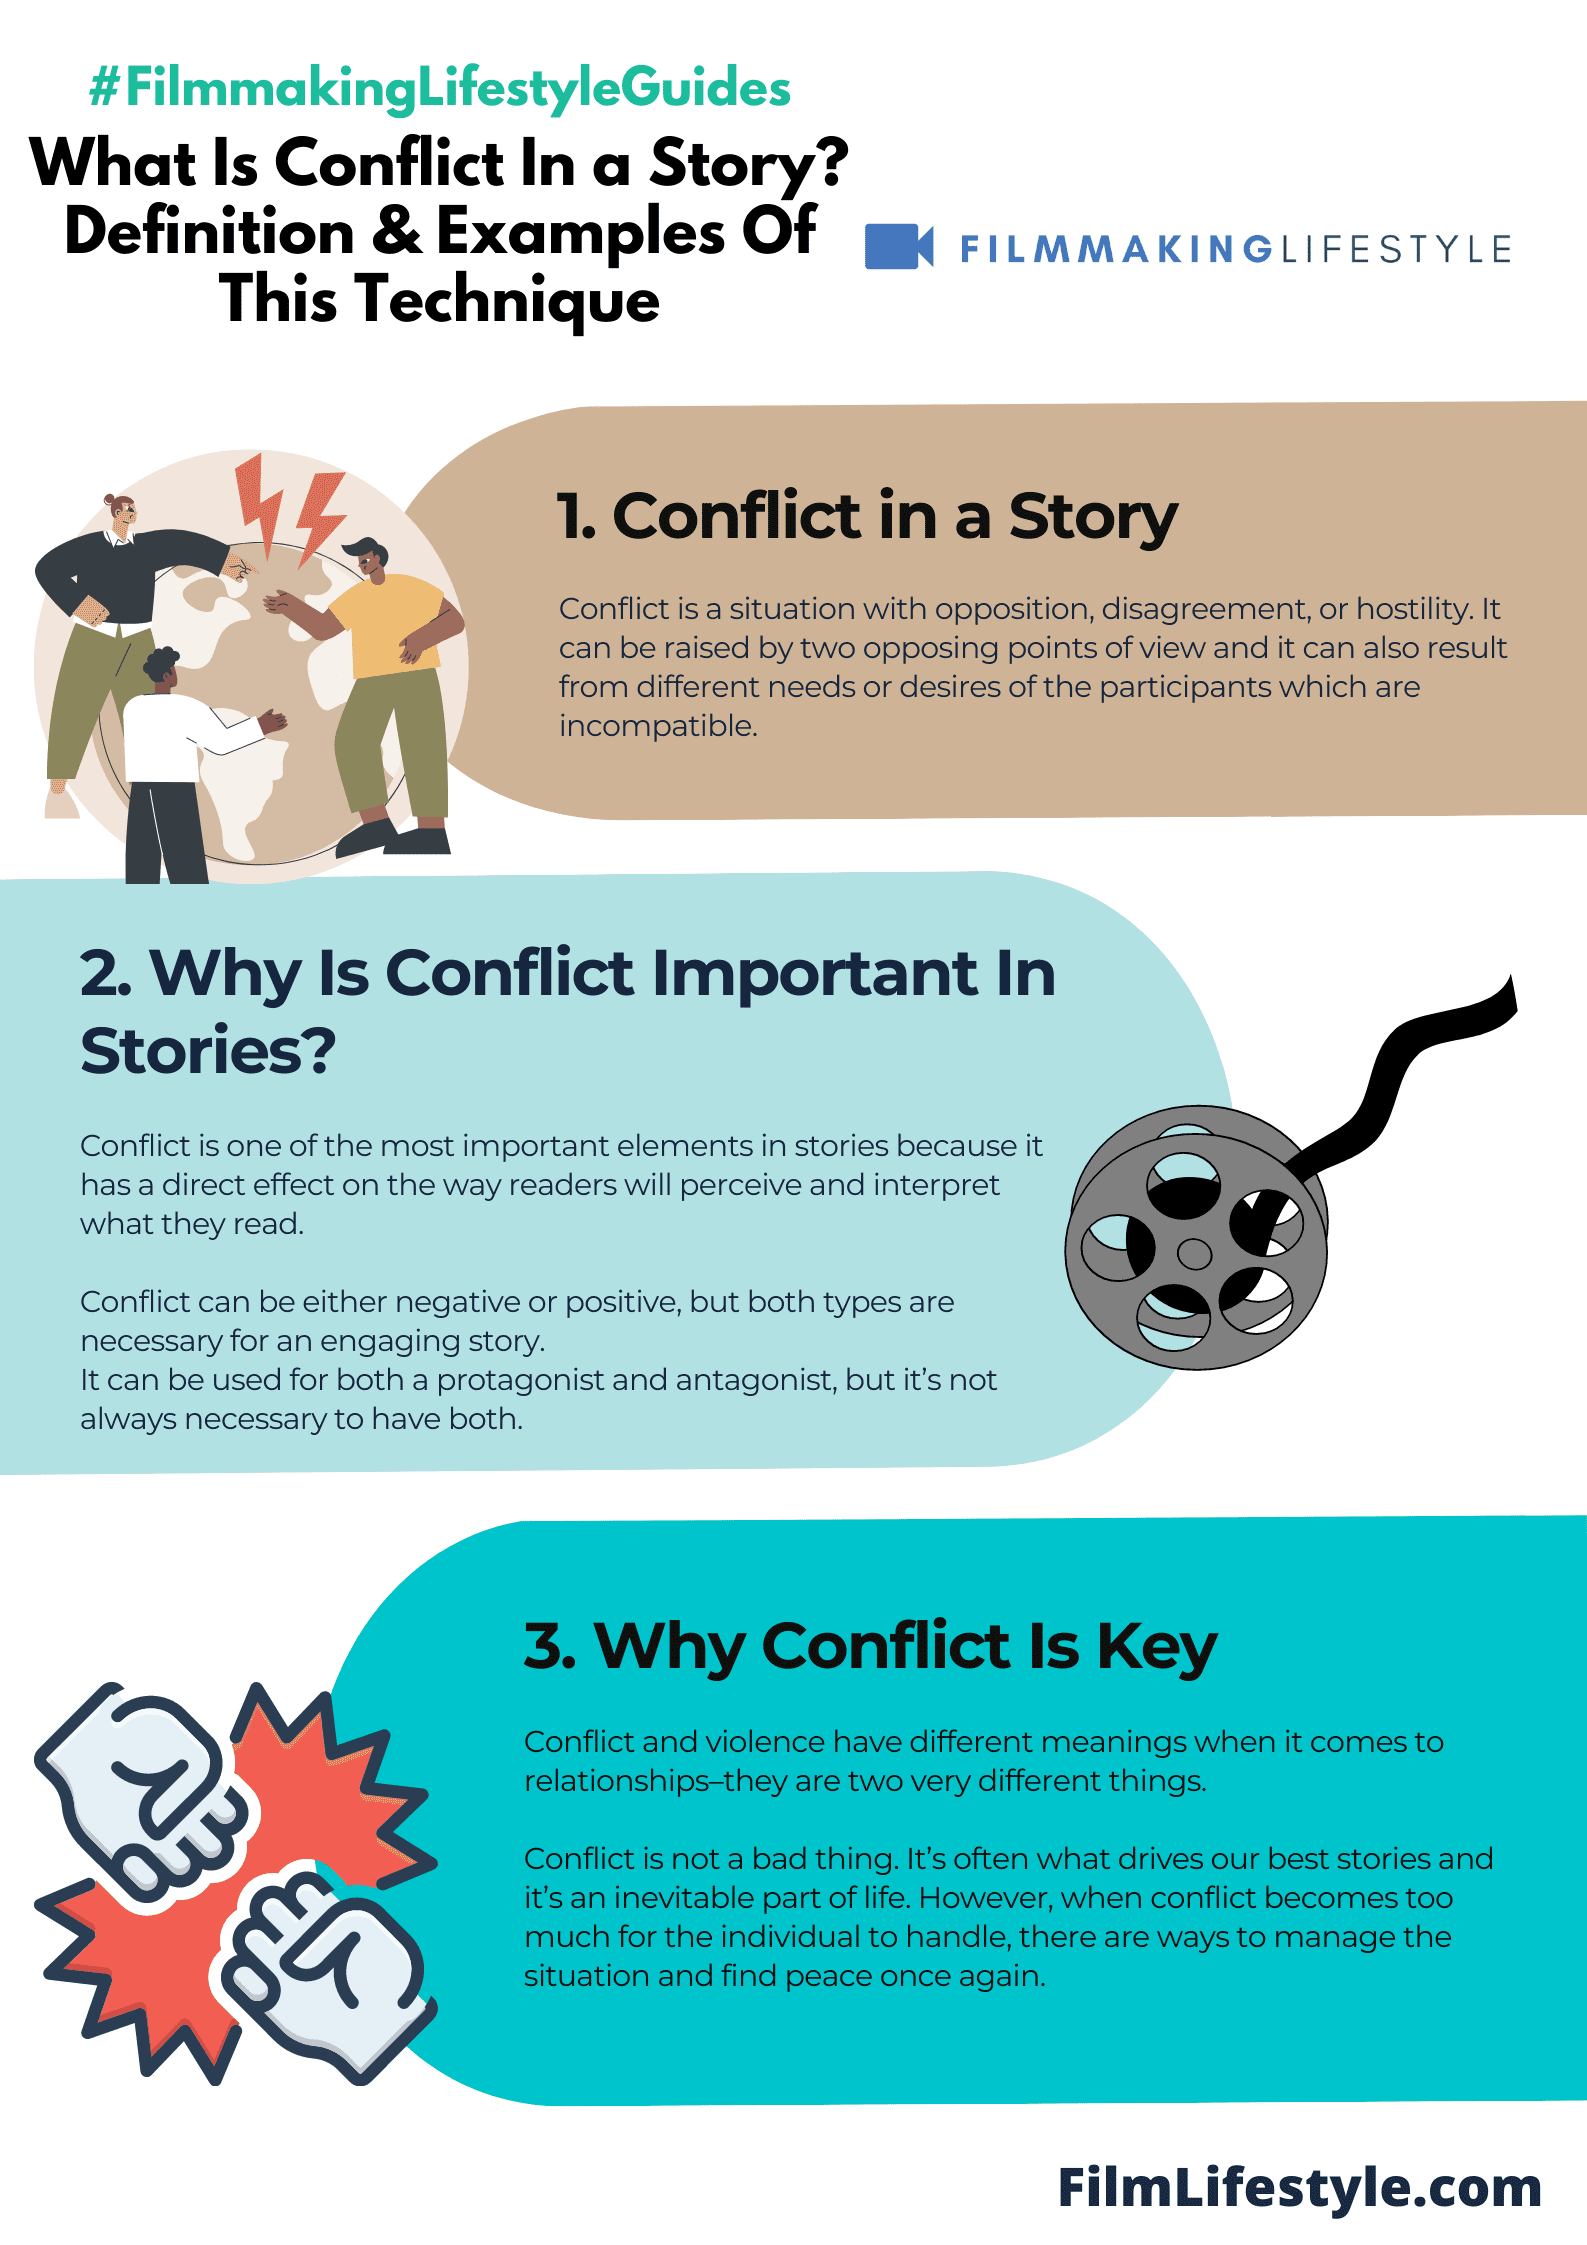 What Is Conflict In a Story